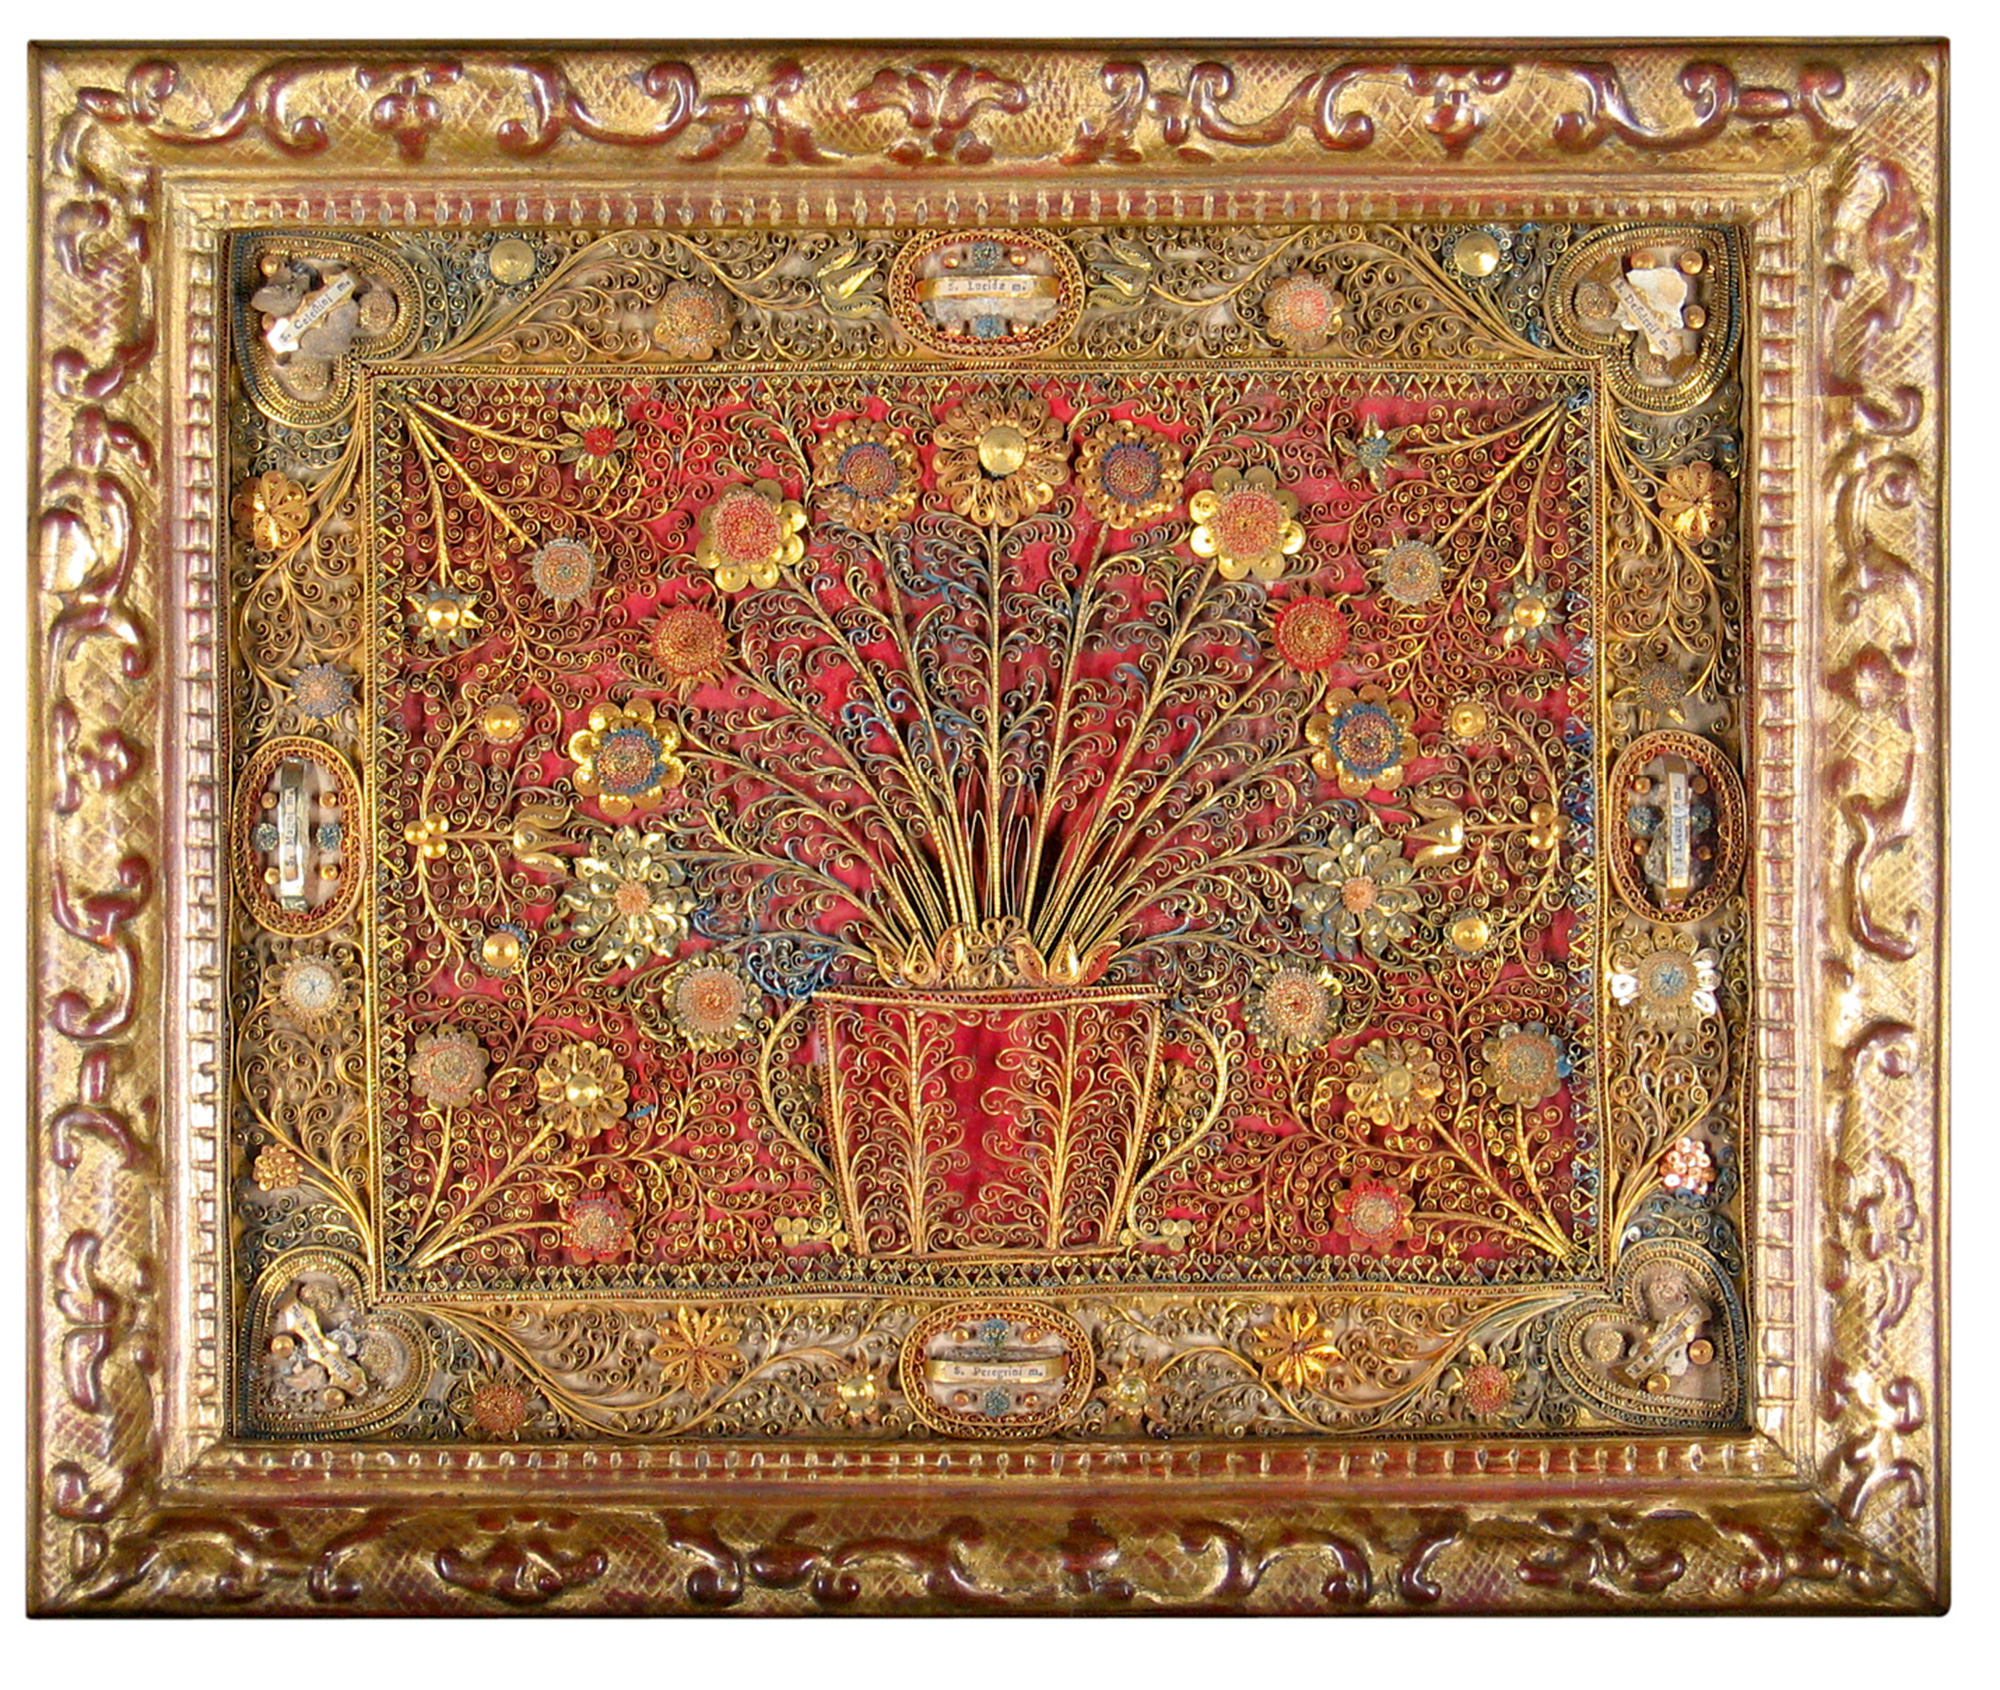 A French “Paperole” from the early eighteenth century depicting flowers.